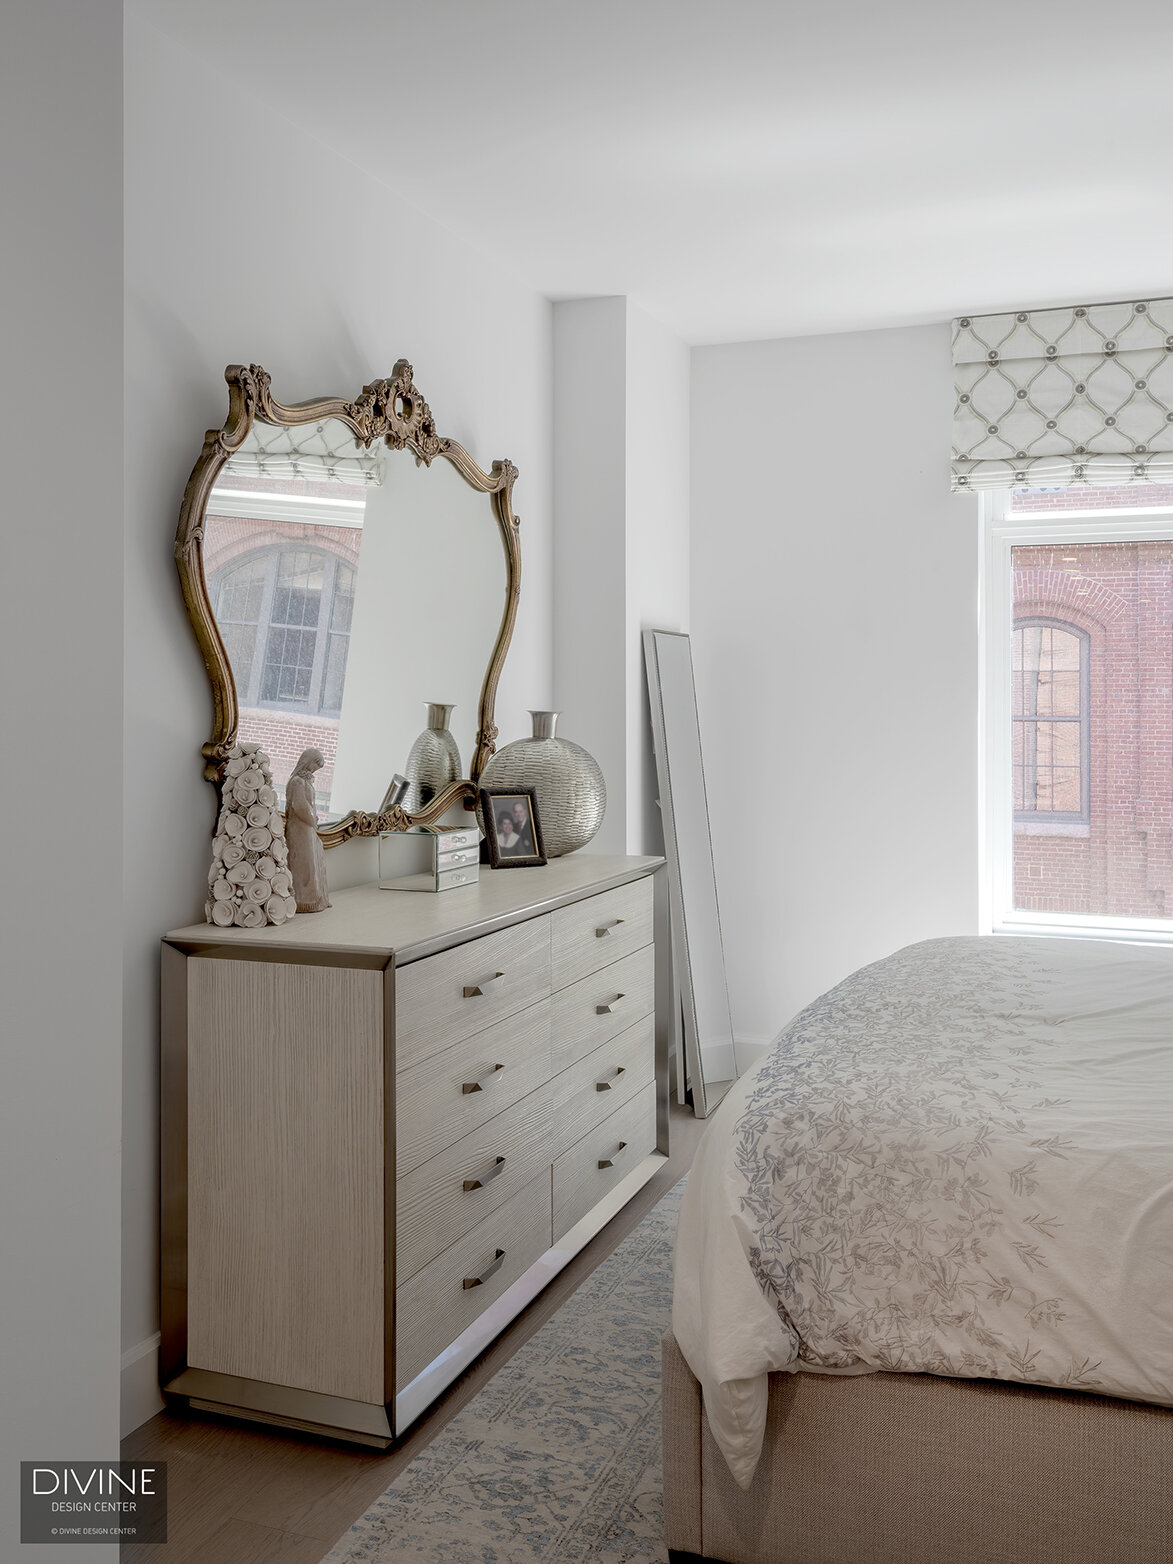  An ornate mirror and transitional style drawer system sit in front of an upholstered bed frame with delicate sheets adorning the mattress. 